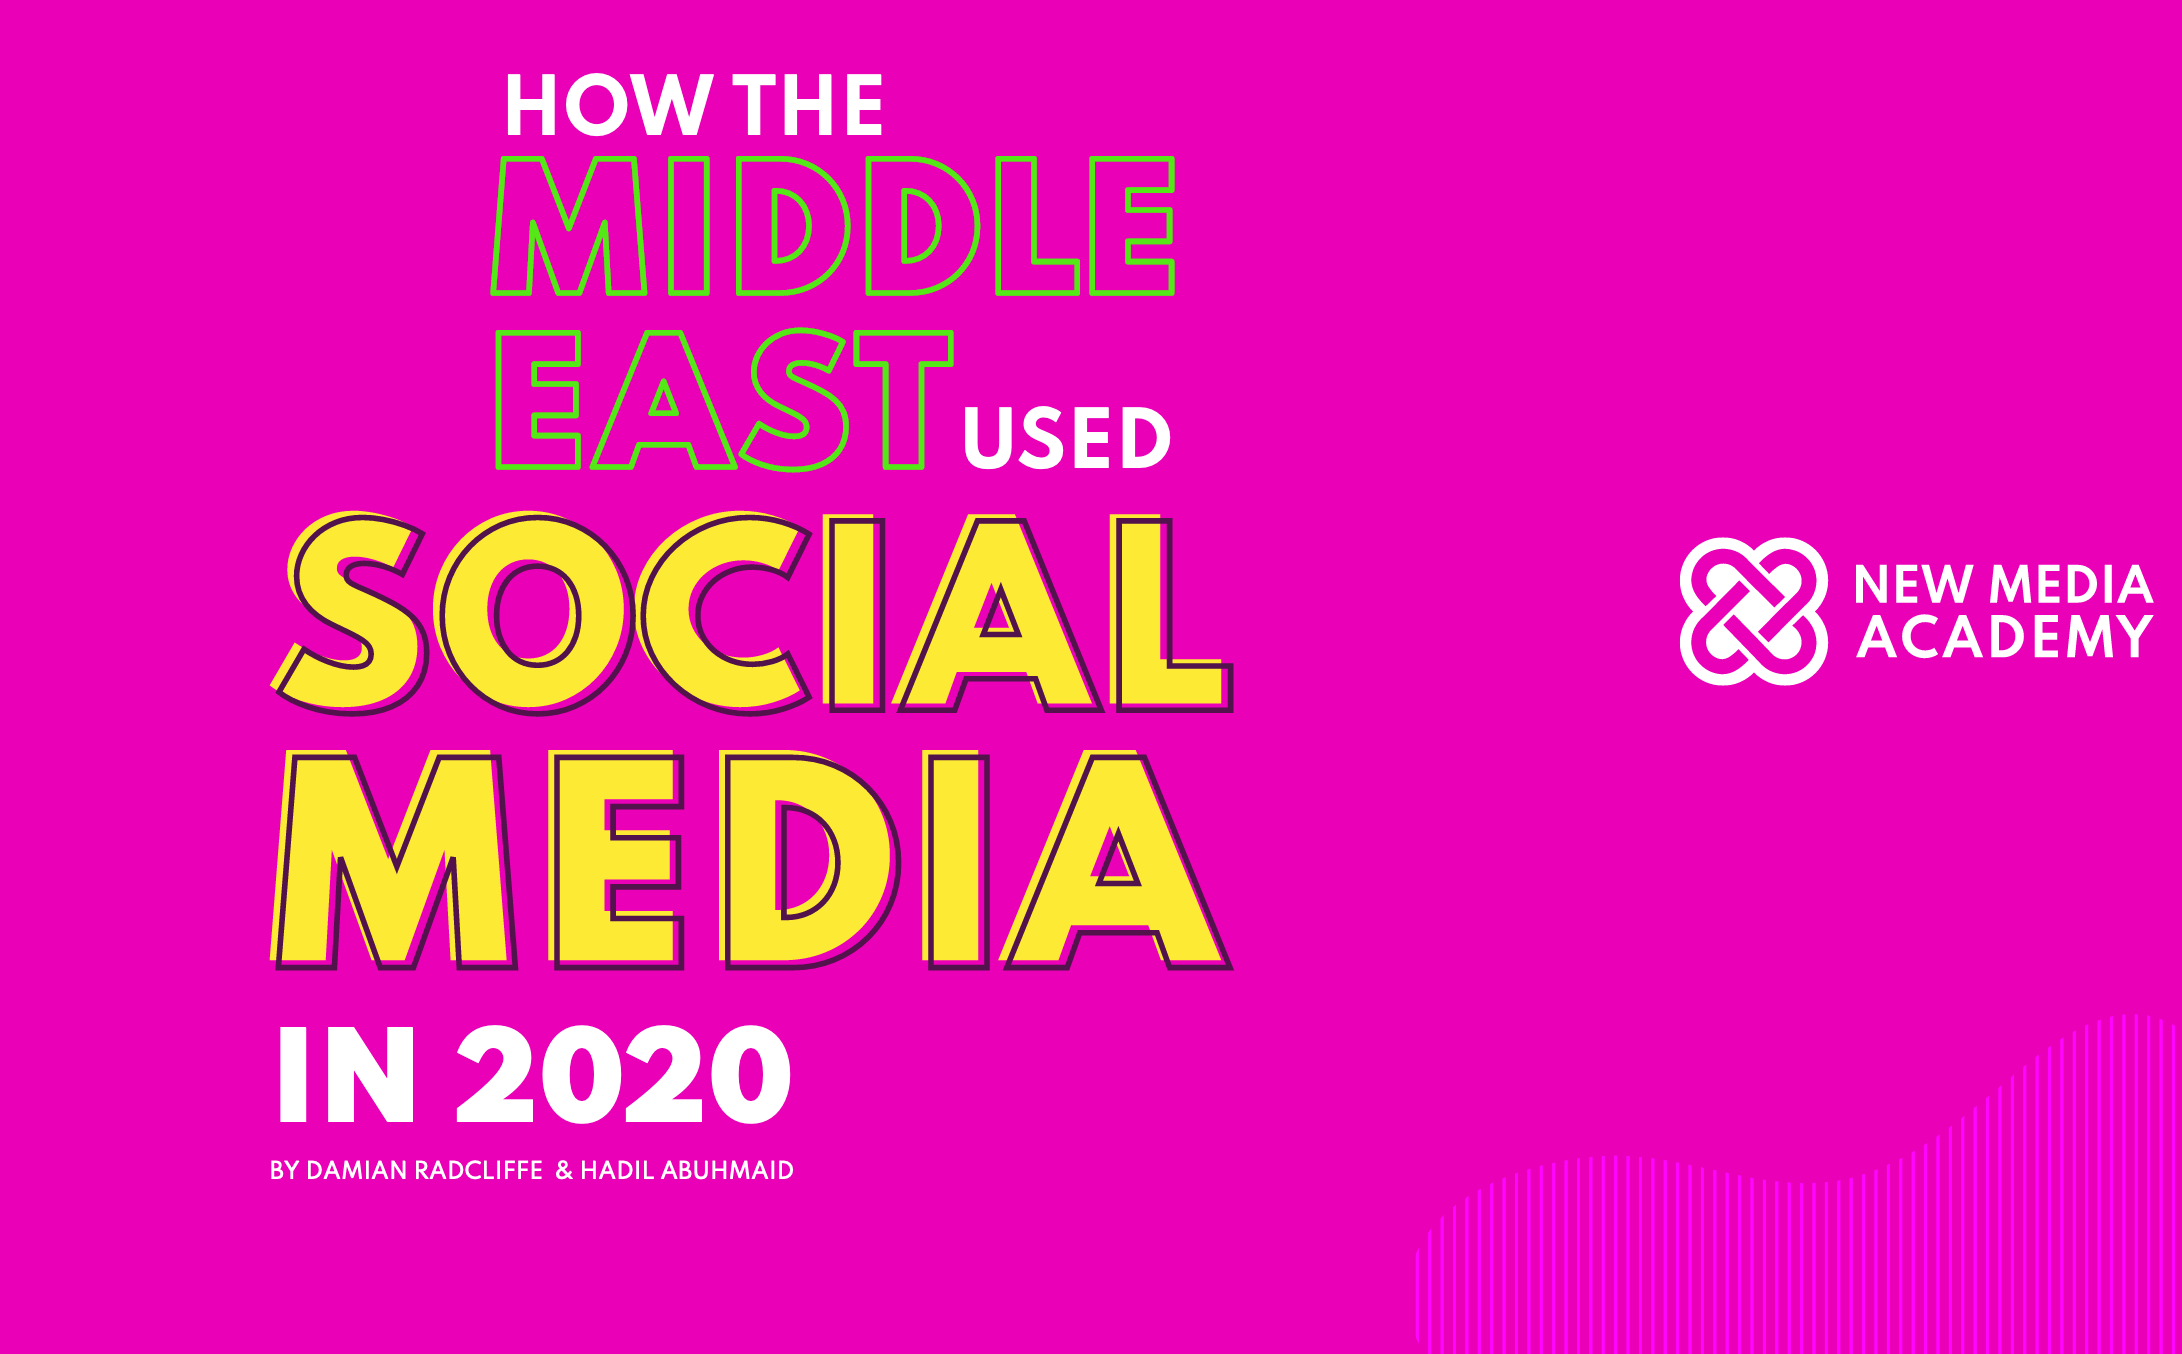 How Did The Middle East Use Social Media In 2020?